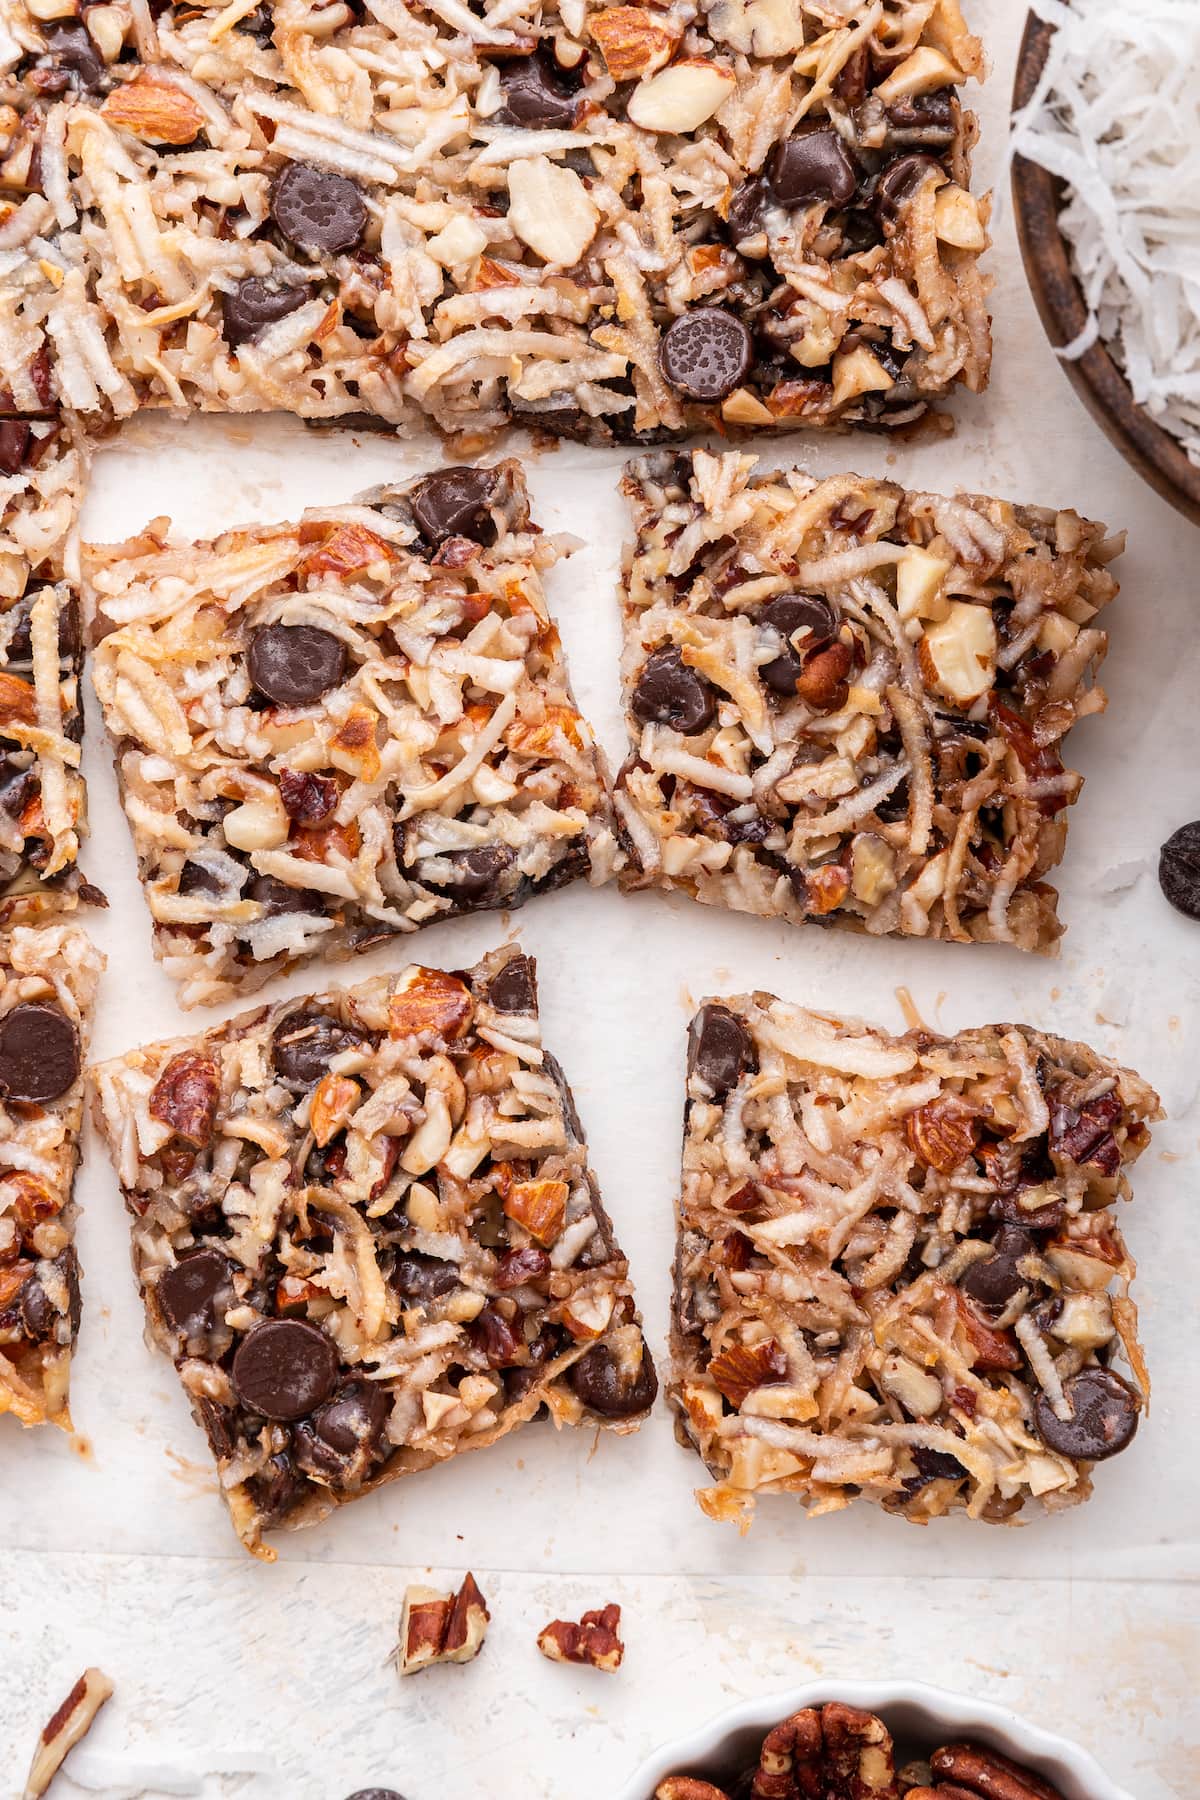 Chocolate coconut bars cut into small squares.